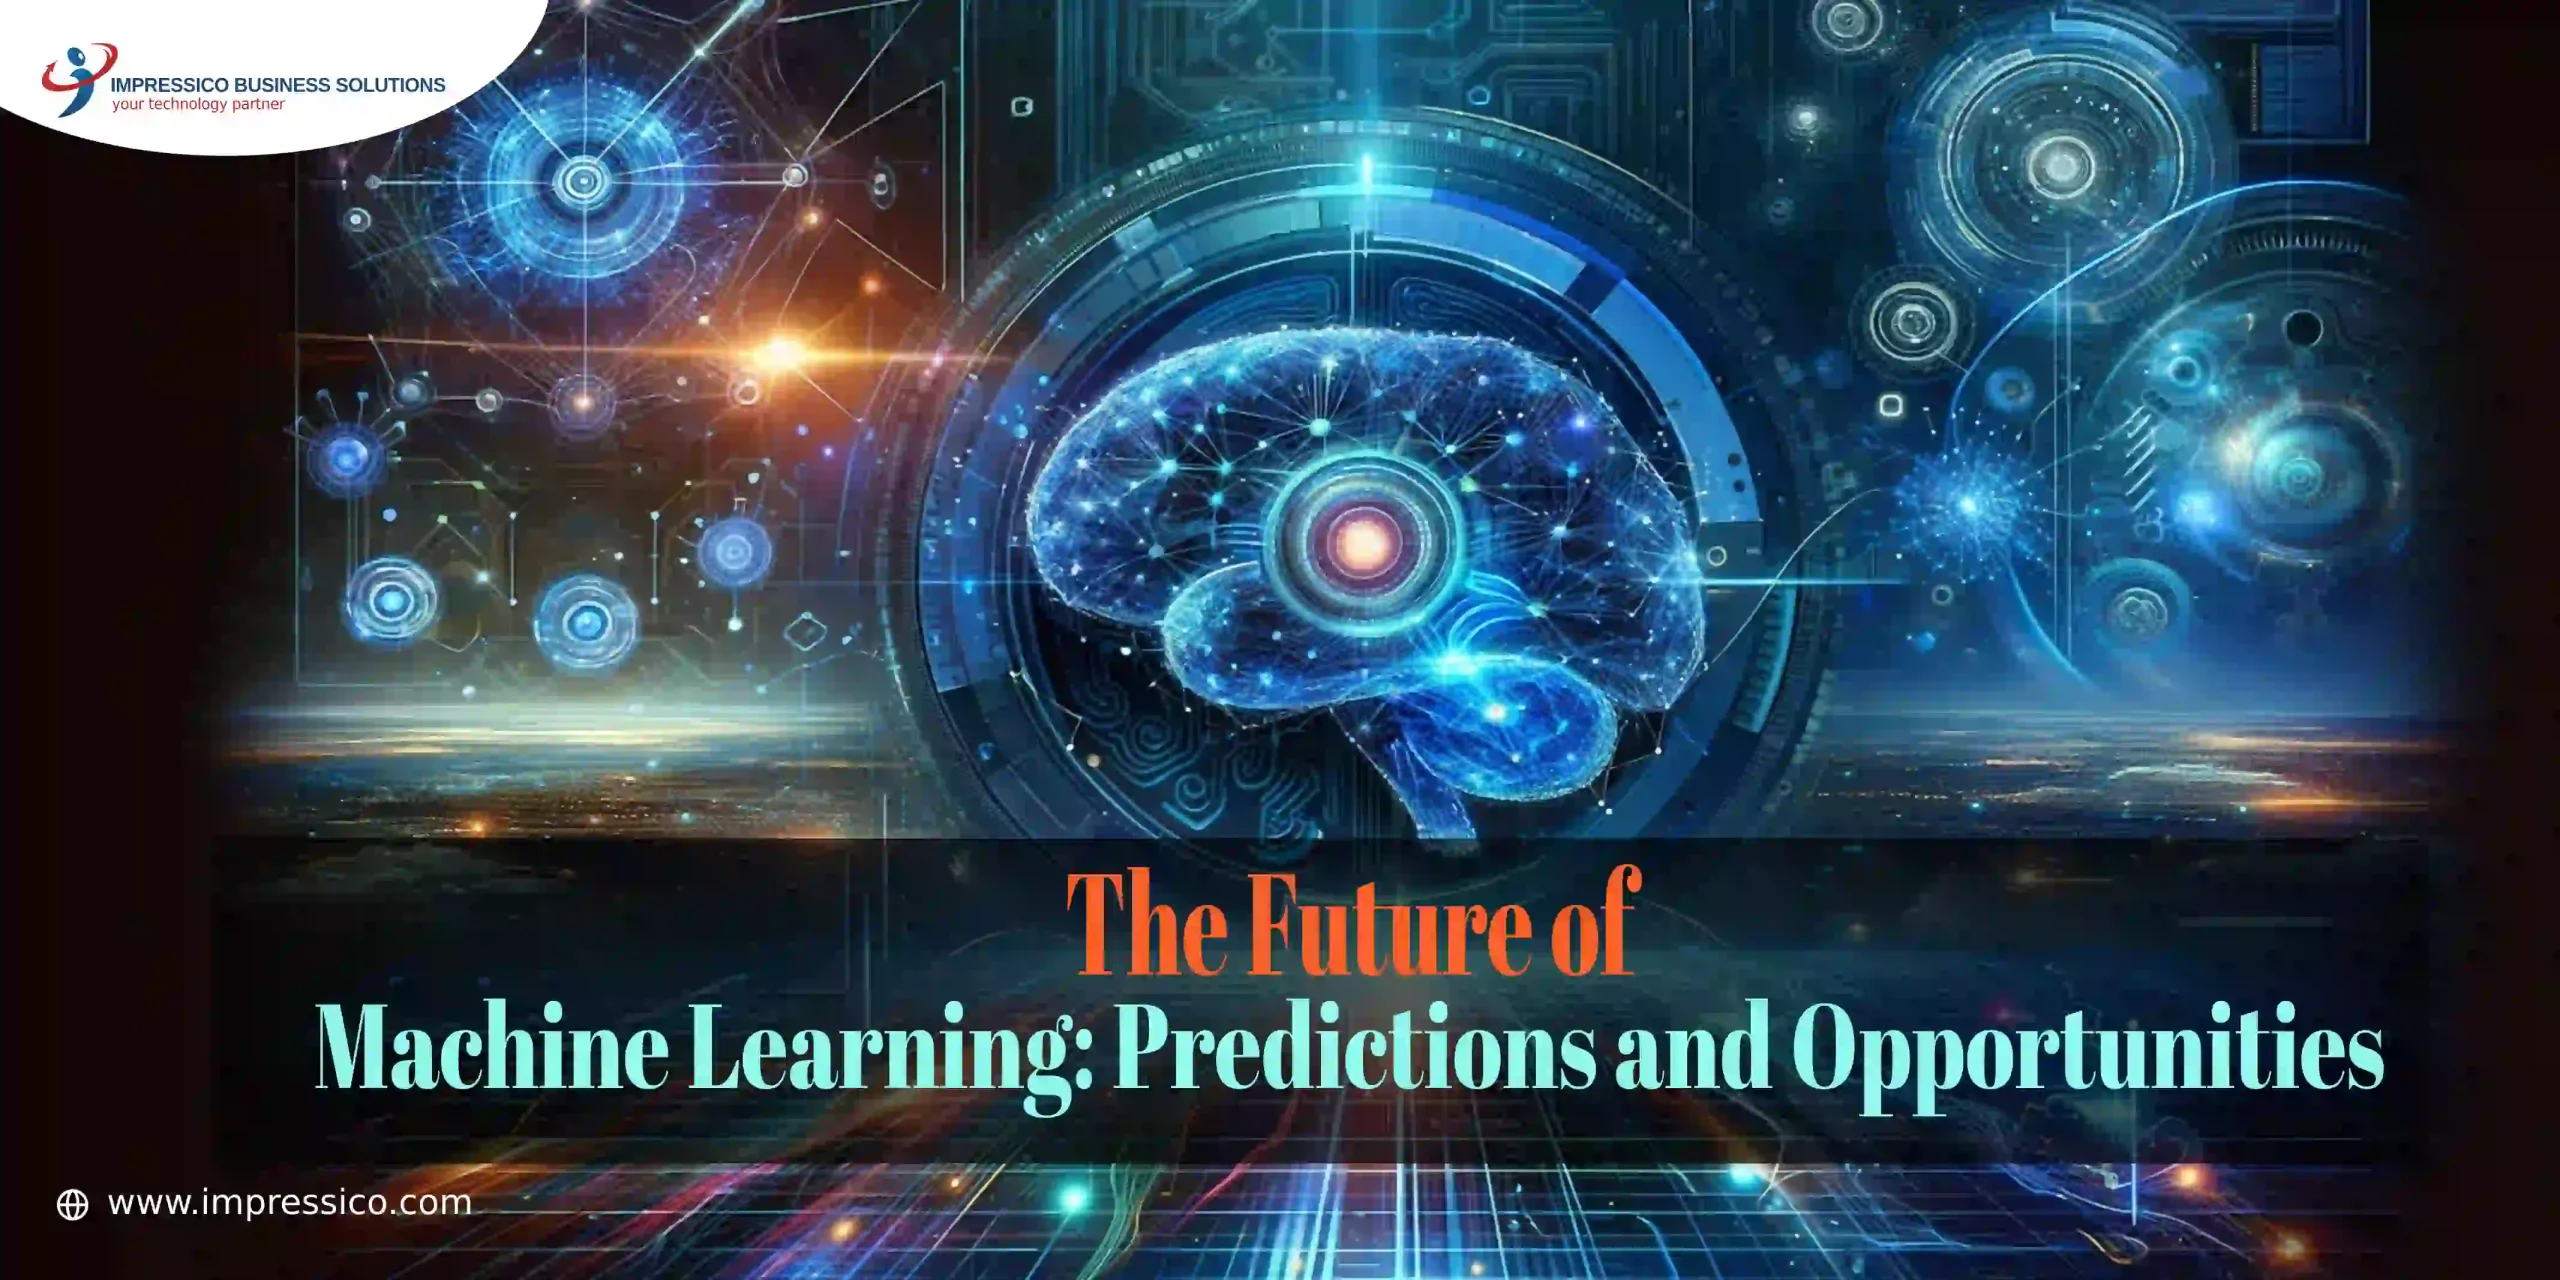 The Future of Deep Learning